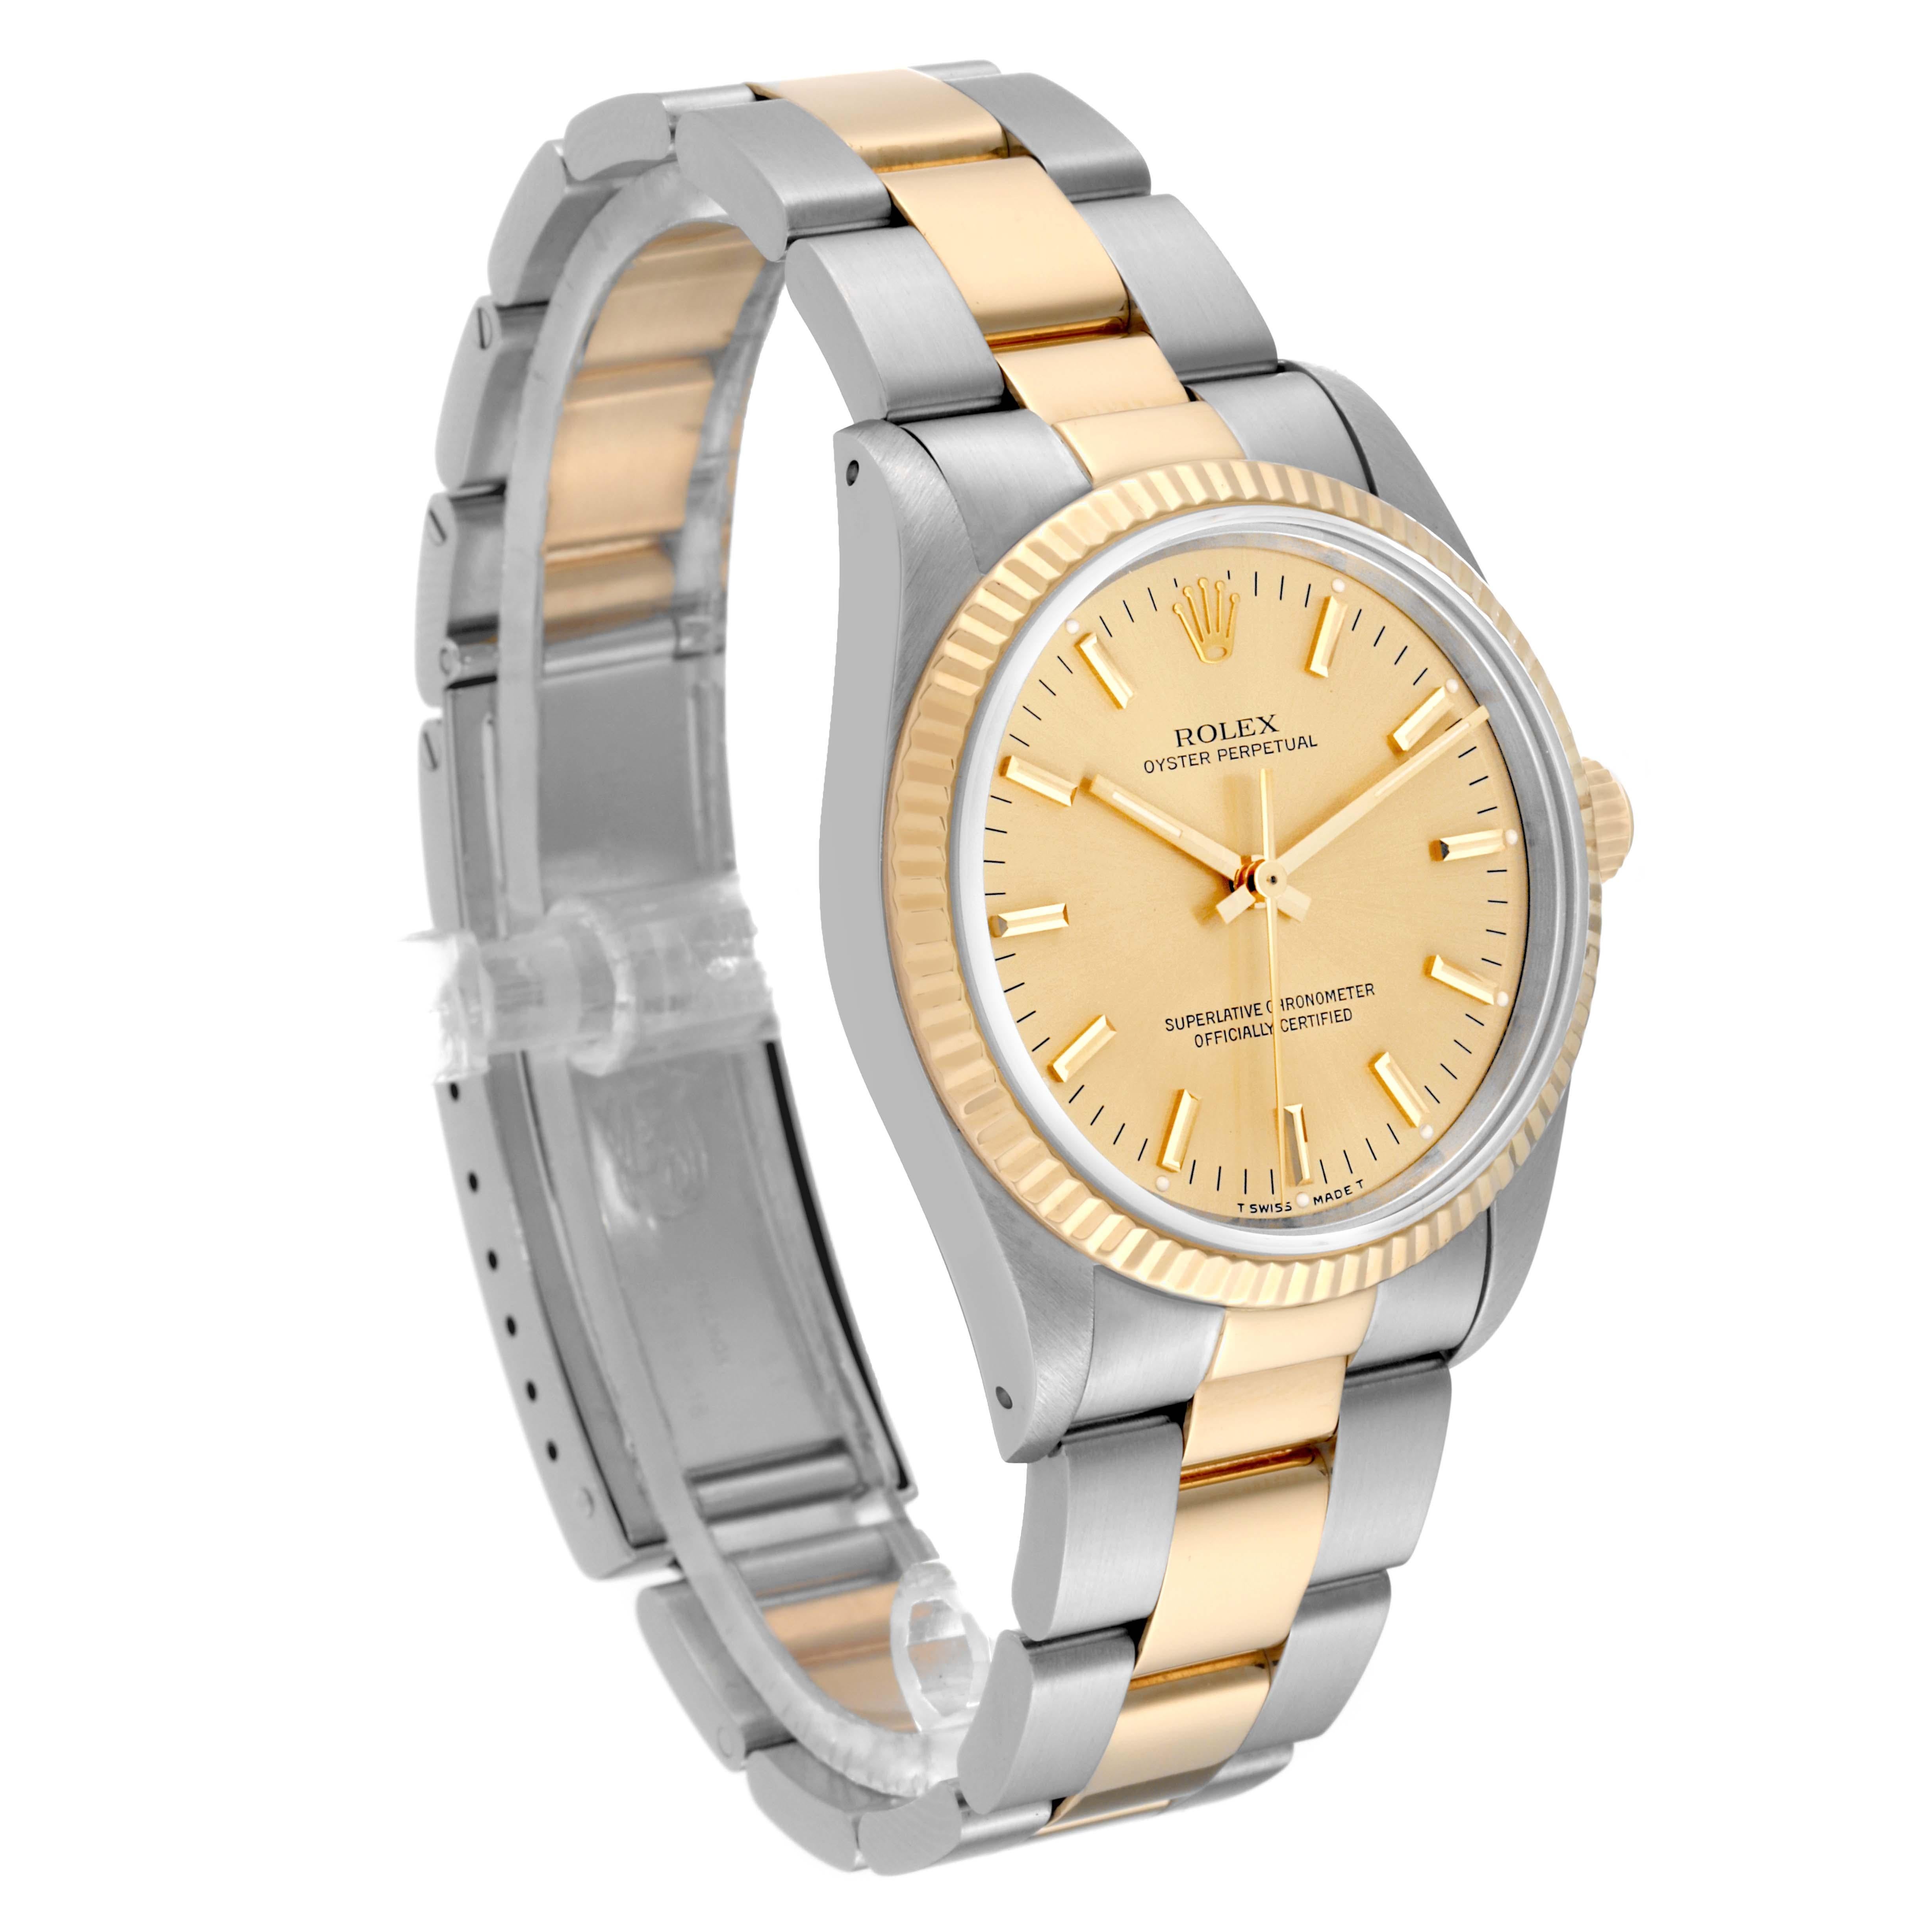 Rolex Oyster Perpetual Fluted Bezel Steel Yellow Gold Mens Watch 14233 For Sale 1